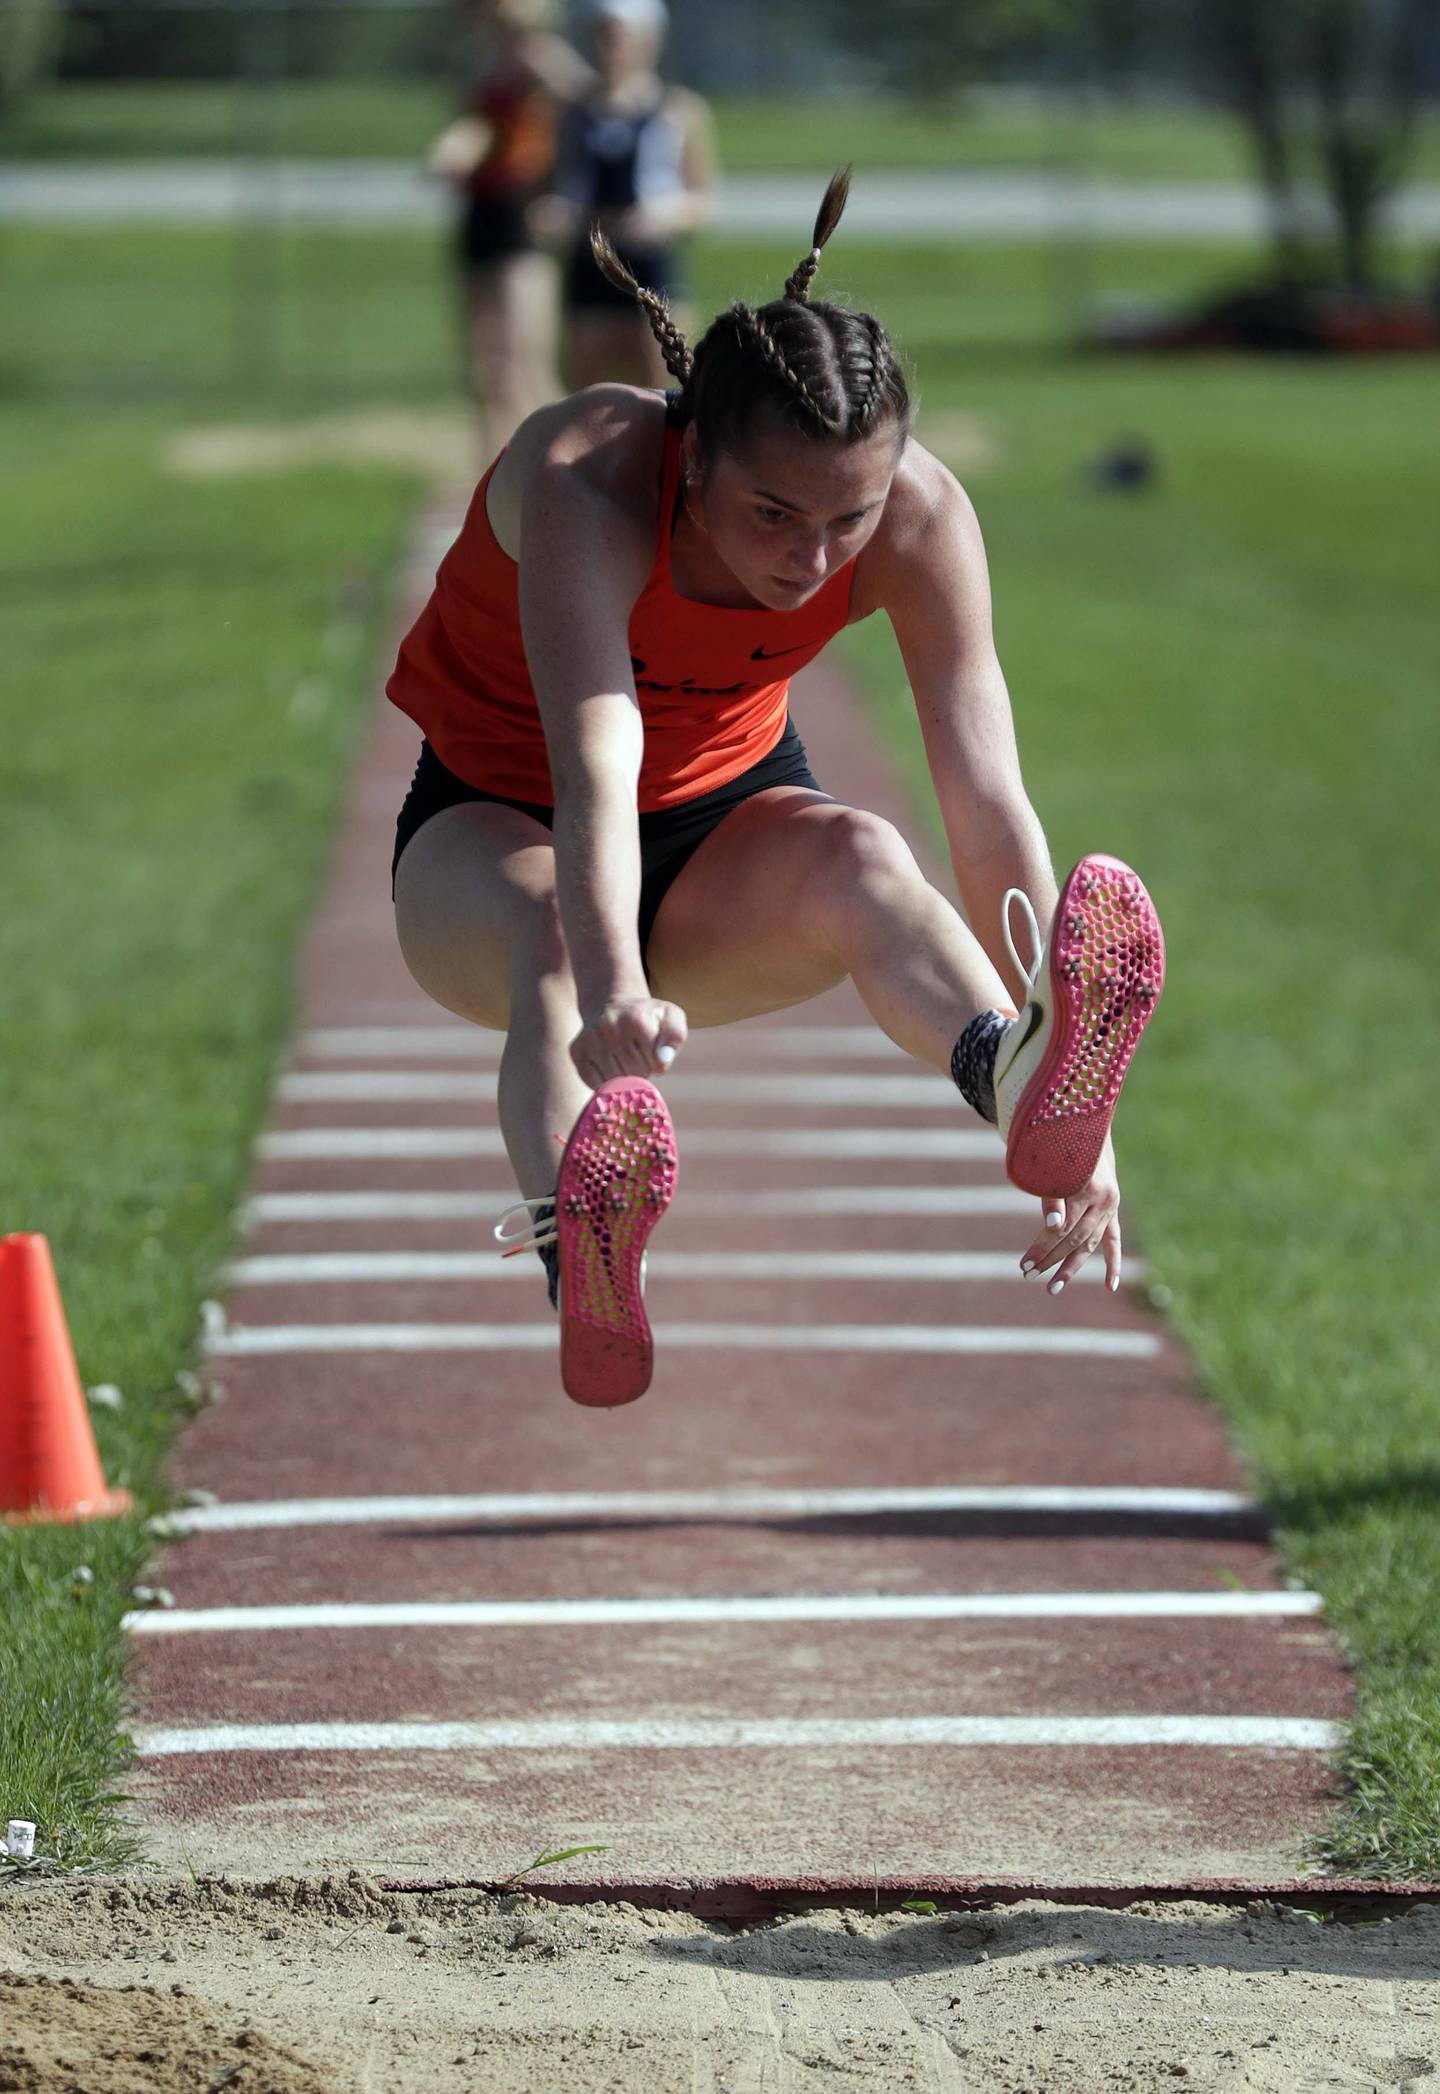 Brian Hill/bhill@dailyherald.com
St. Charles East’s Katie Kempff competes in the long jump during the Class 3A Lake Park sectional girls track Thursday May 12, 2022 in Roselle.